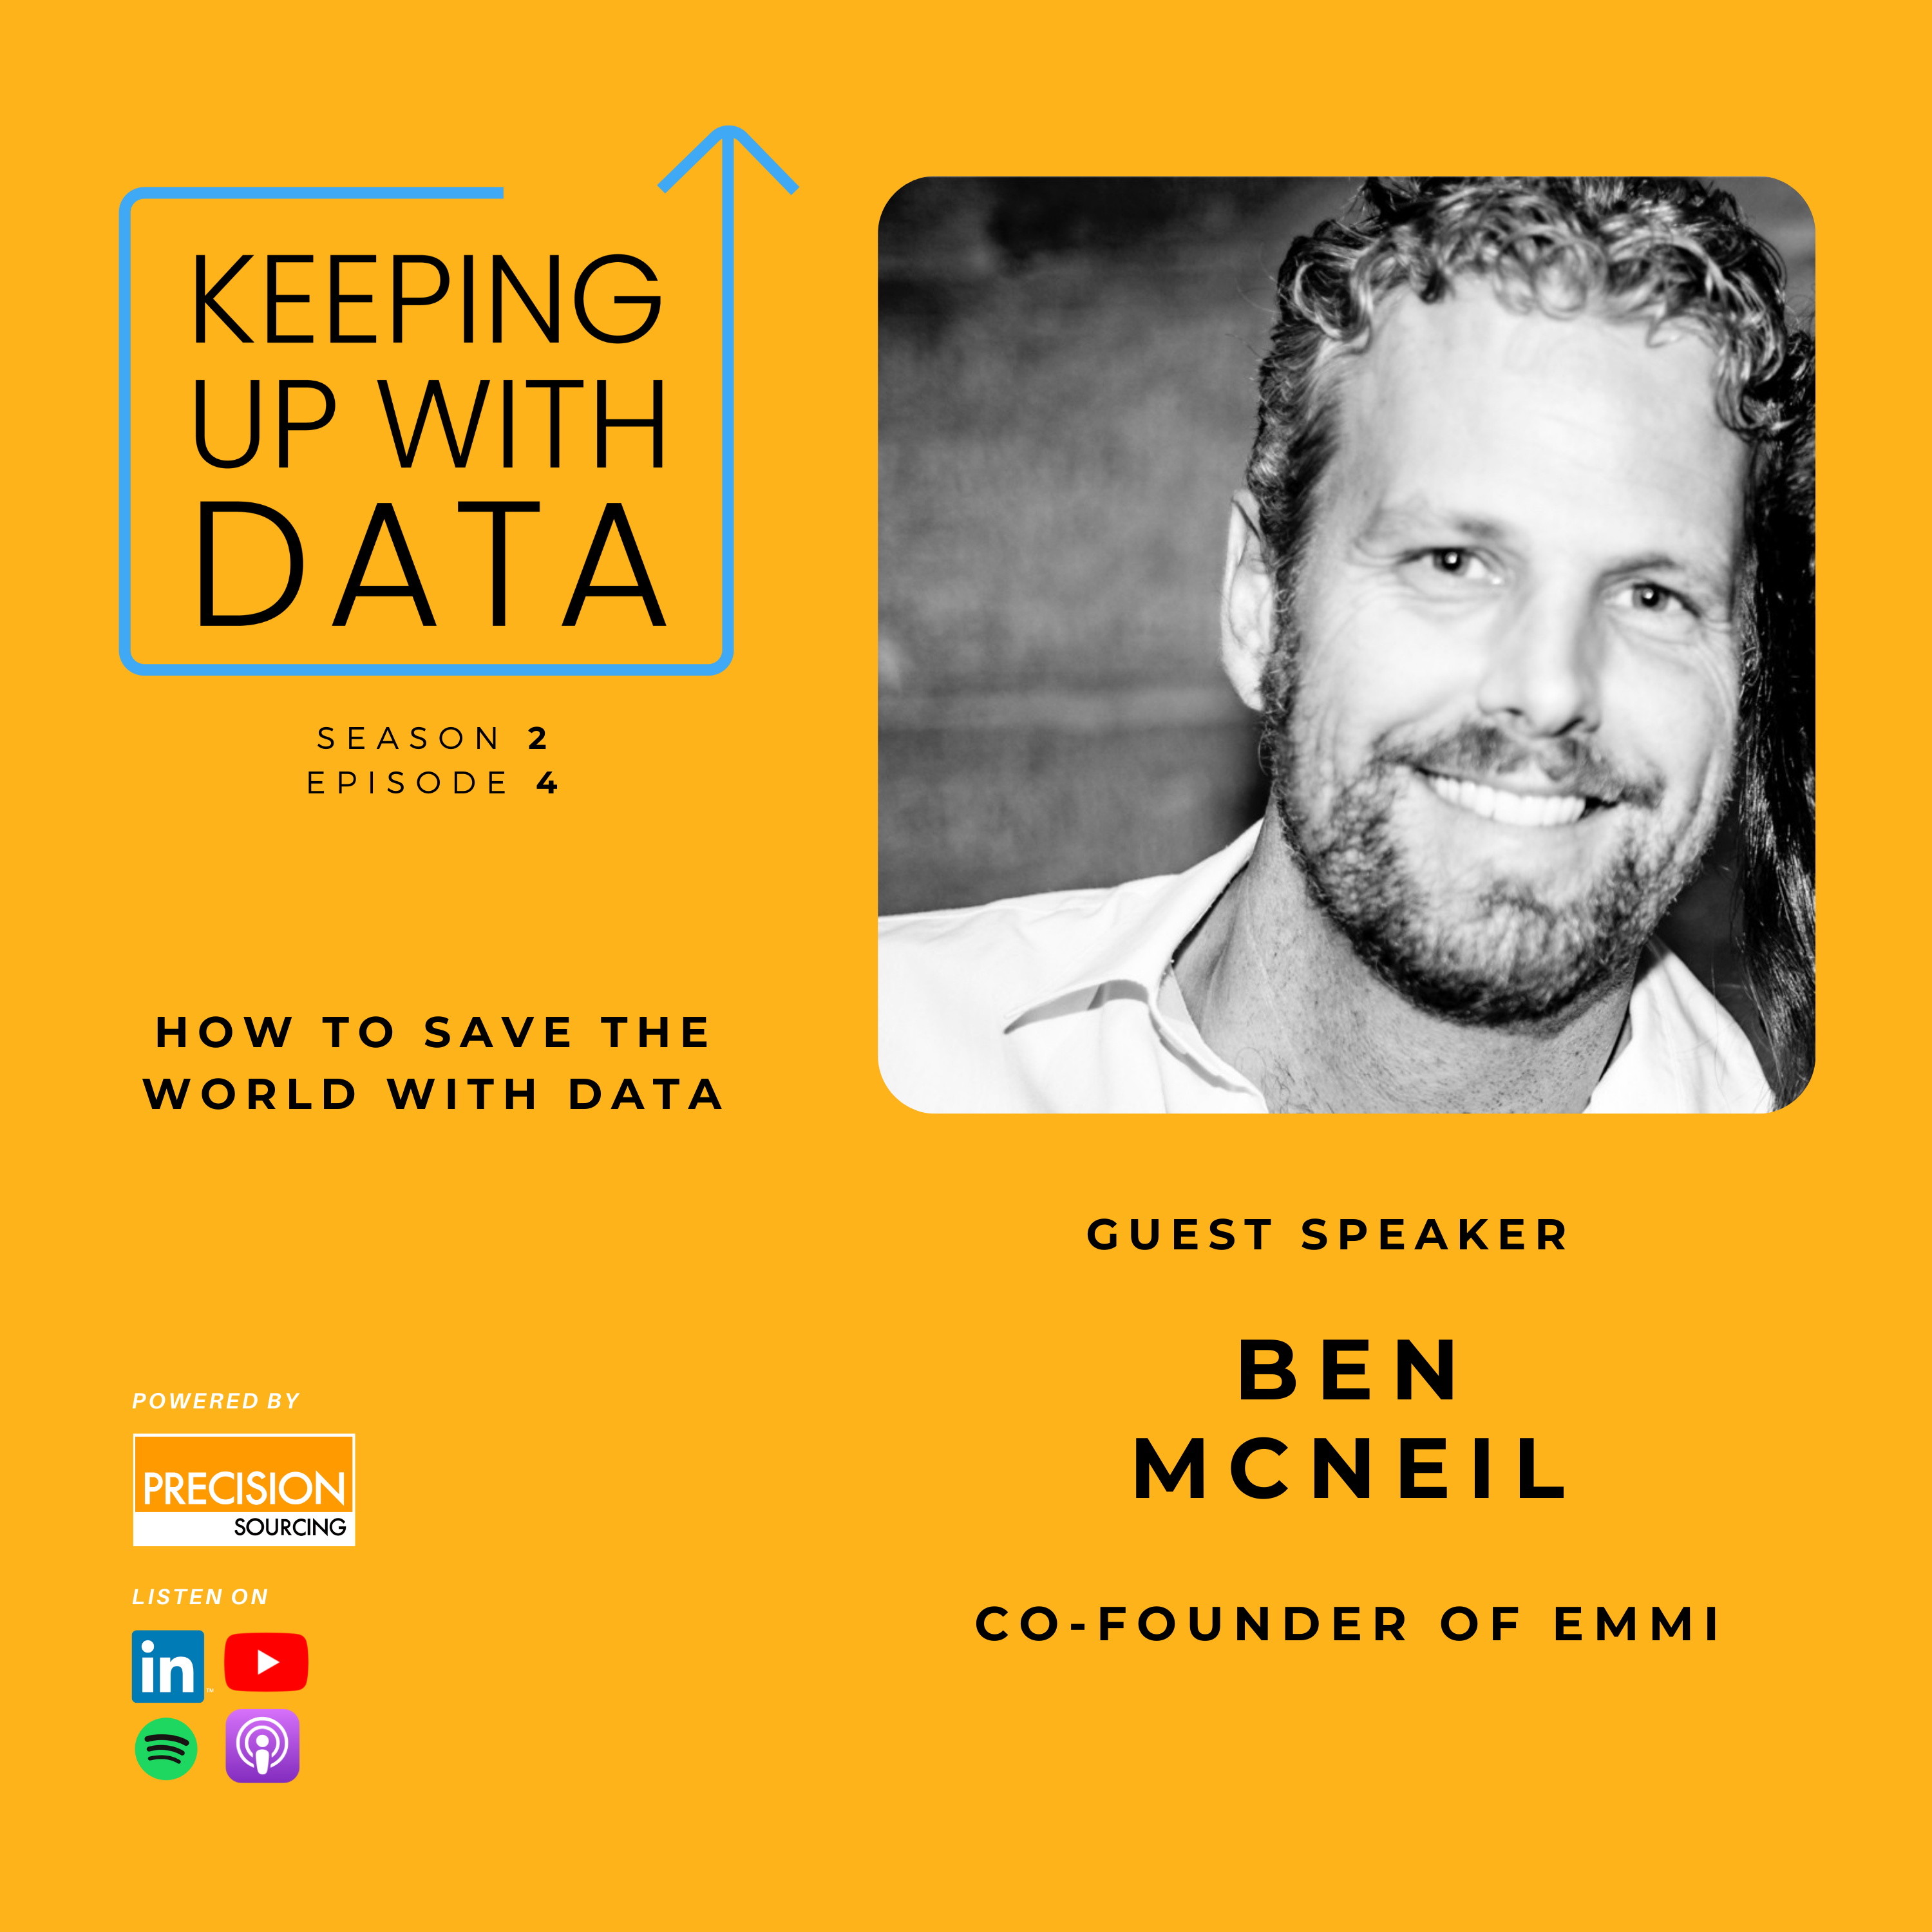 How To Save The World With Data with Ben McNeil